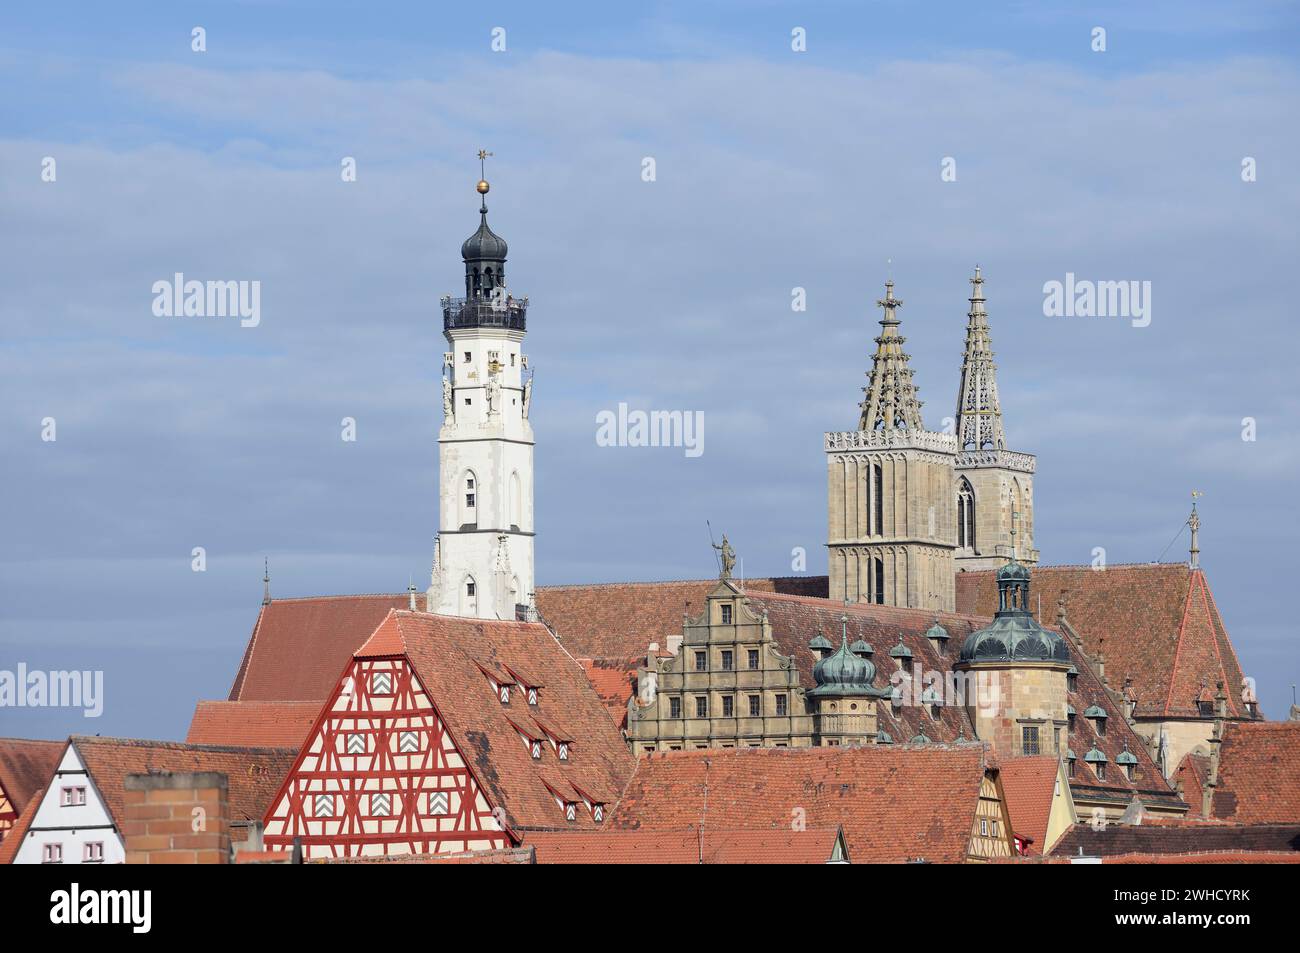 Town hall tower and St. Jacob's Church, Rothenburg ob der Tauber, Middle Franconia, Bavaria, Germany Stock Photo